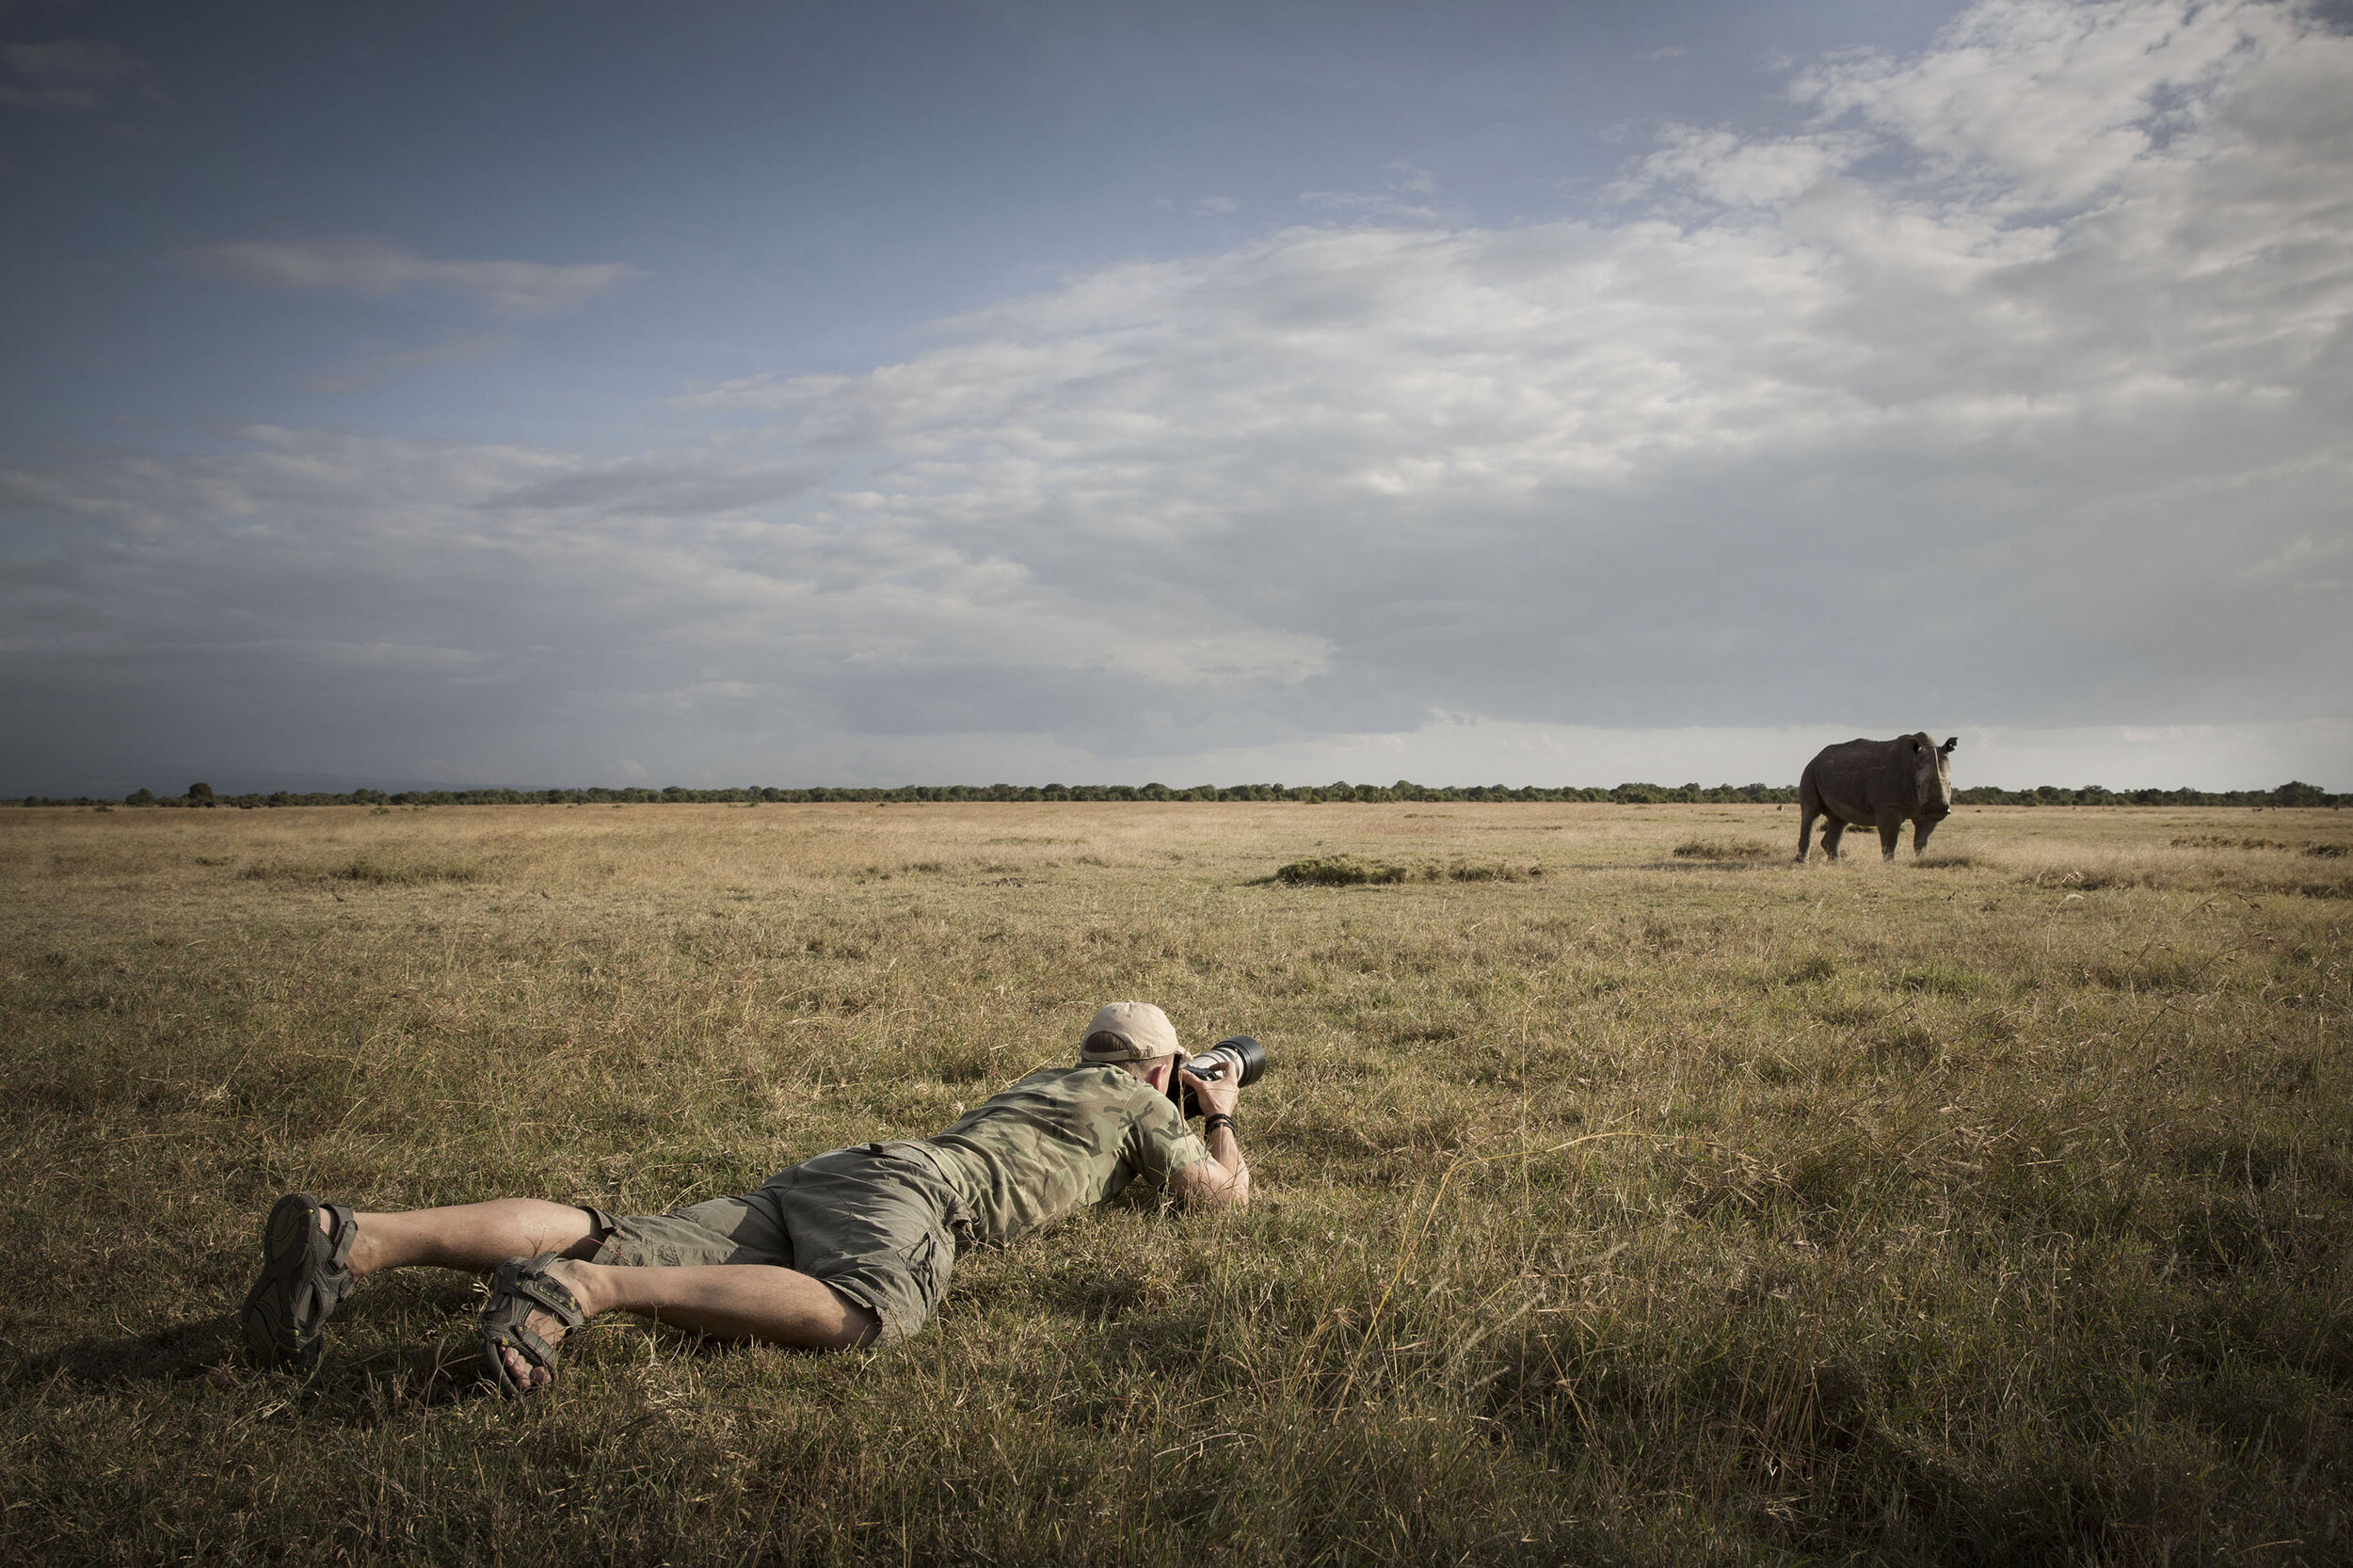 Photographer Bjorn Persson is taking a photo of a rhino in a supplied photo